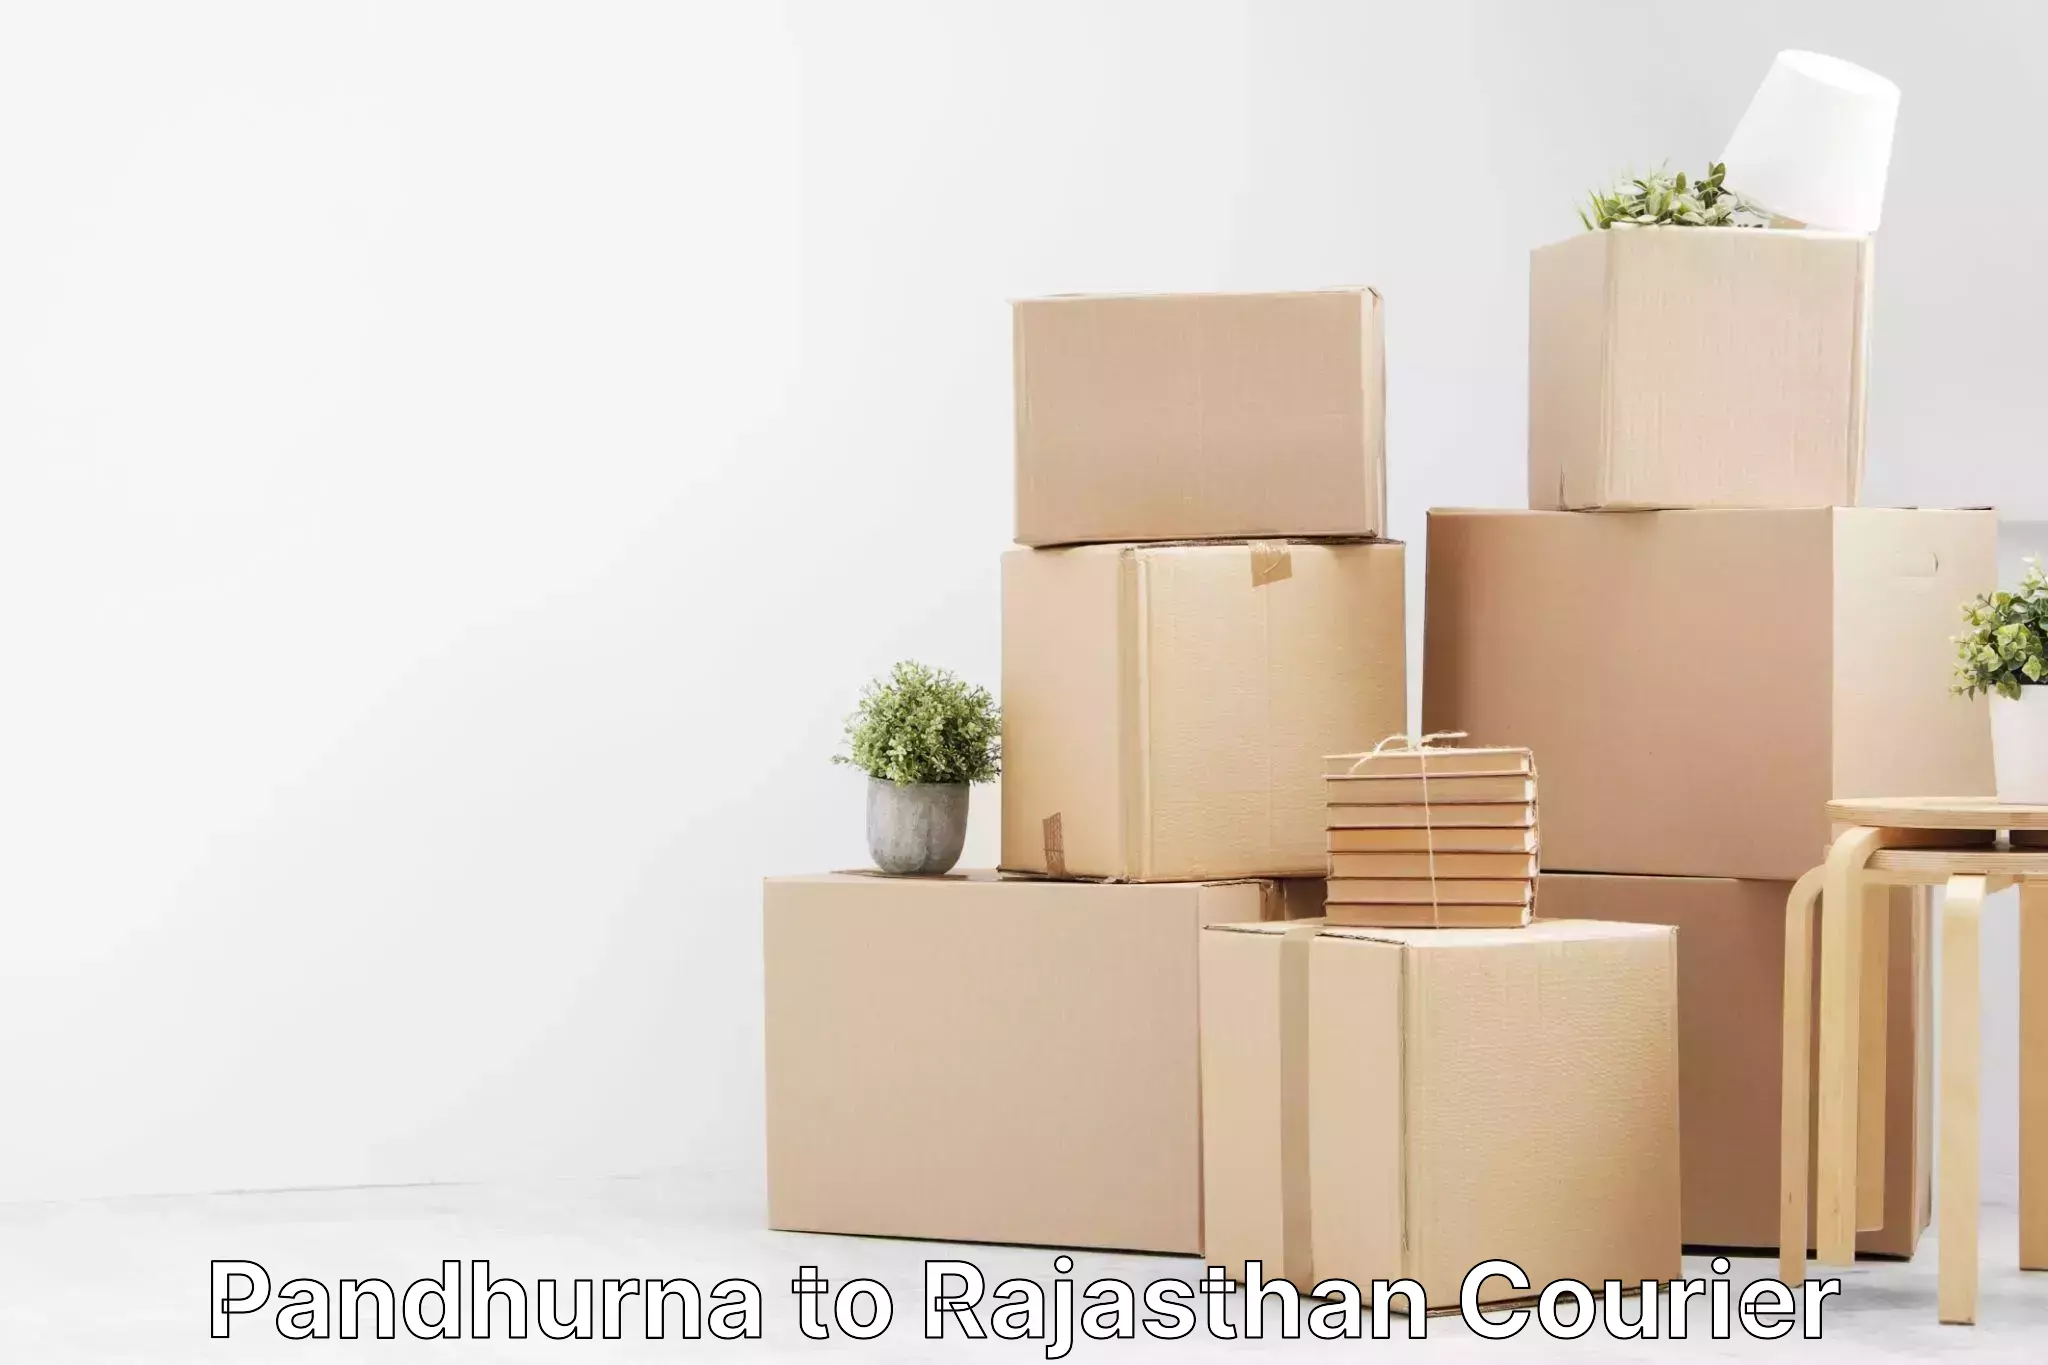 End-to-end delivery Pandhurna to Rajasthan